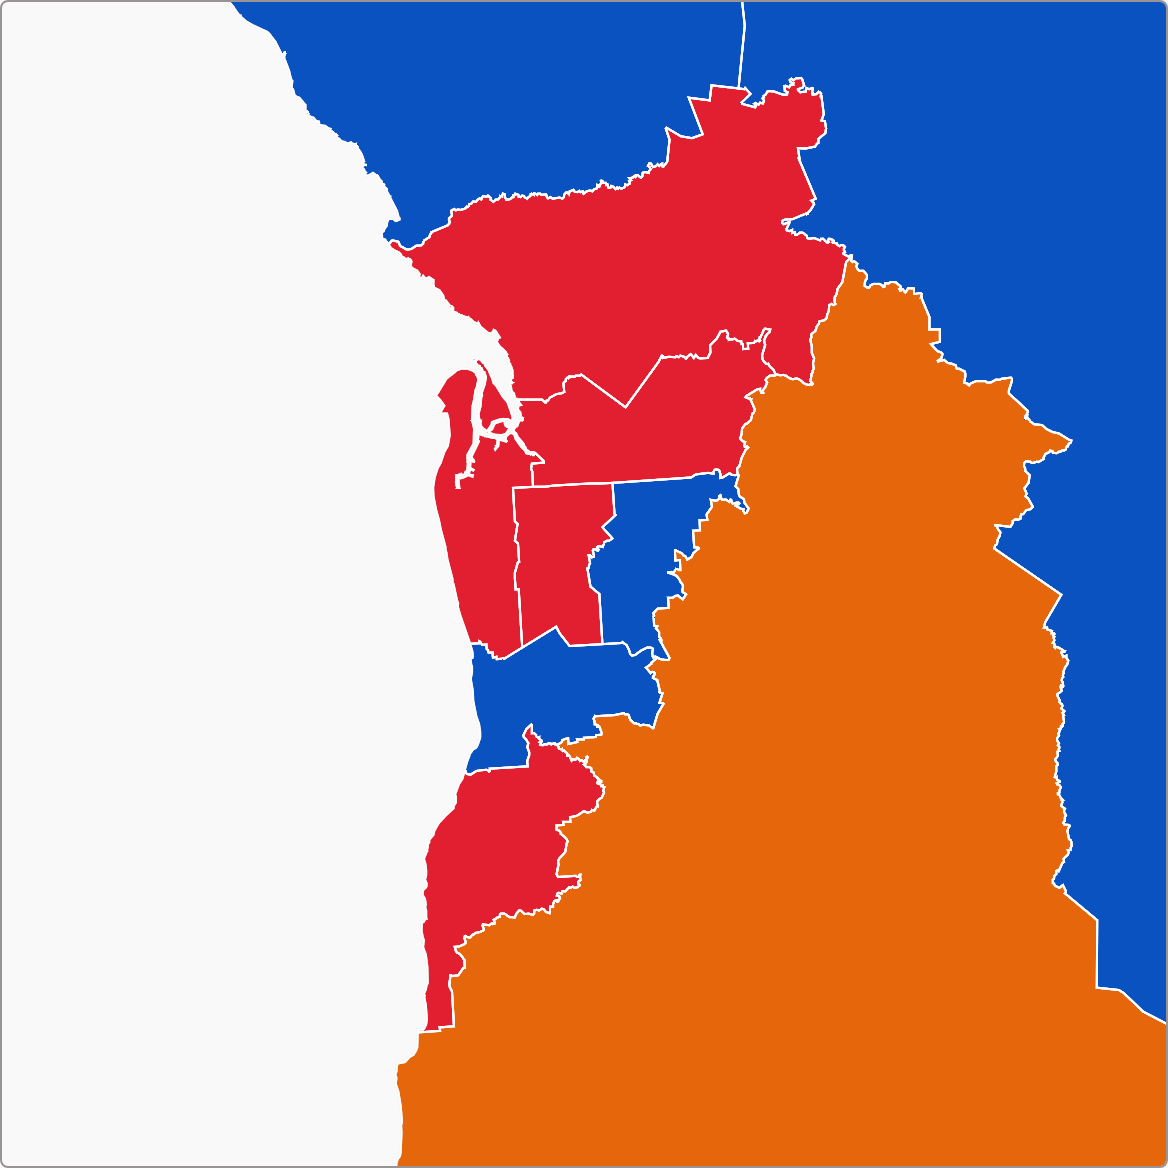 A map showing the 2019 electoral result in Adelaide.